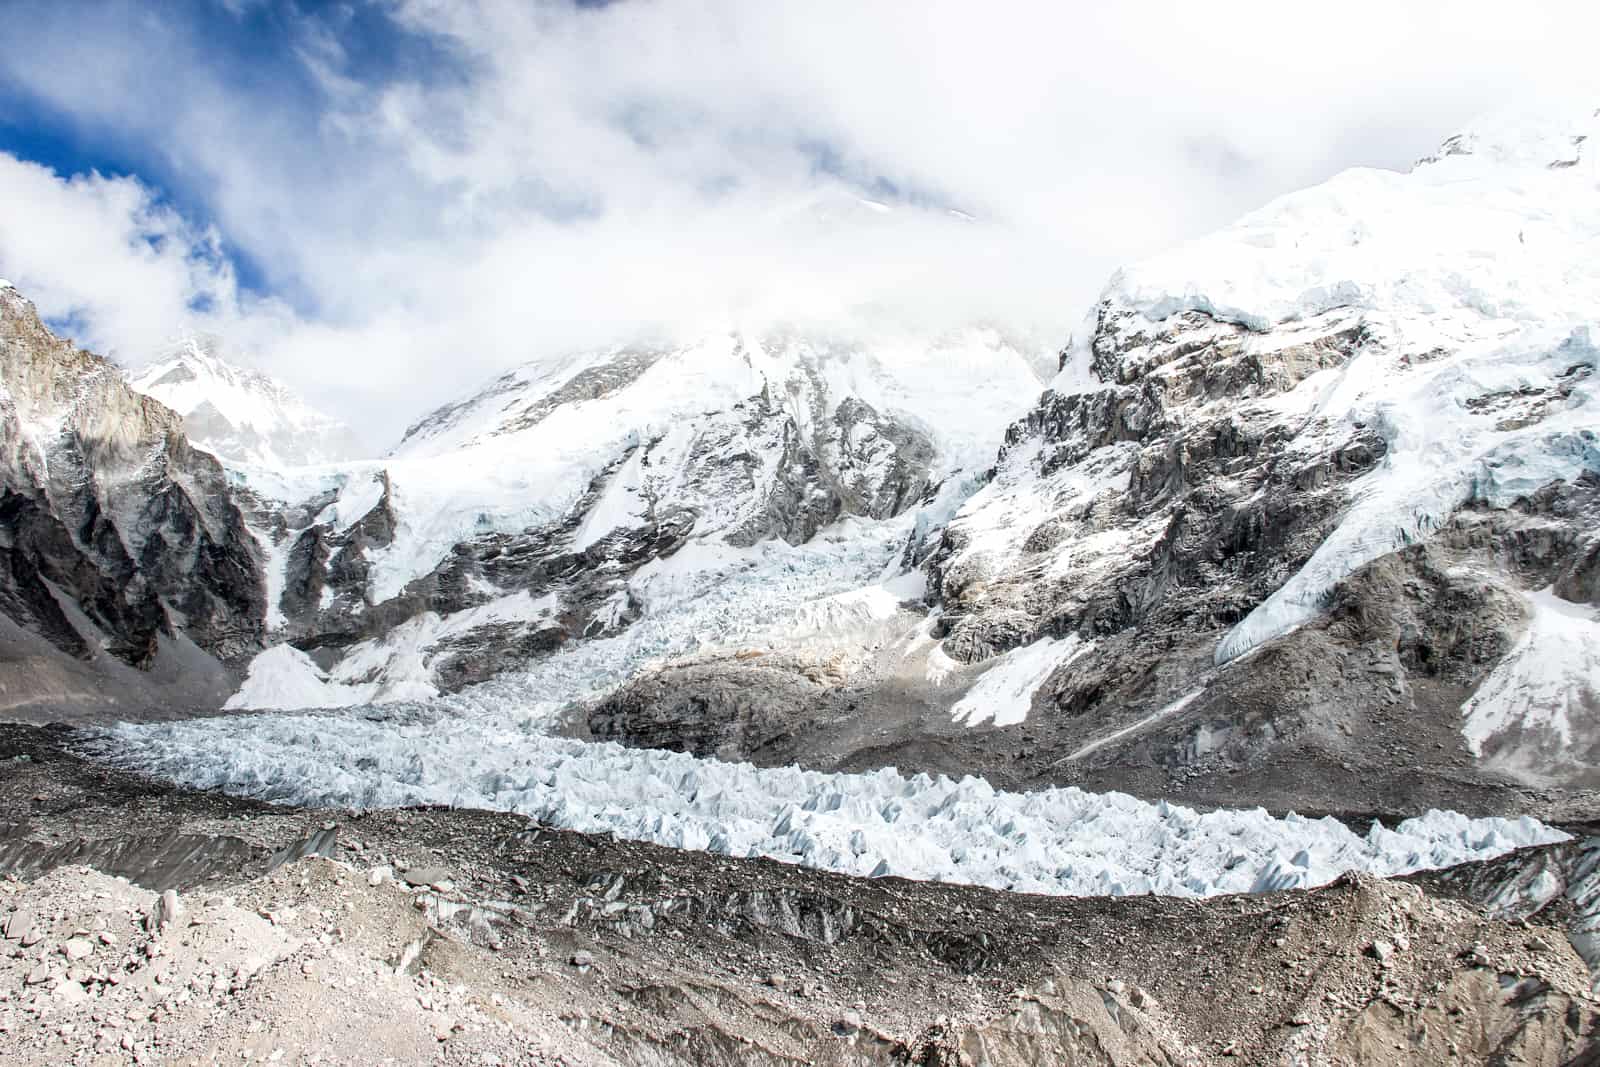 The stretch of spiky ice of the Khumbu icefall at Everest Base Camp, with Mount. Everest looking above it in the same white glow